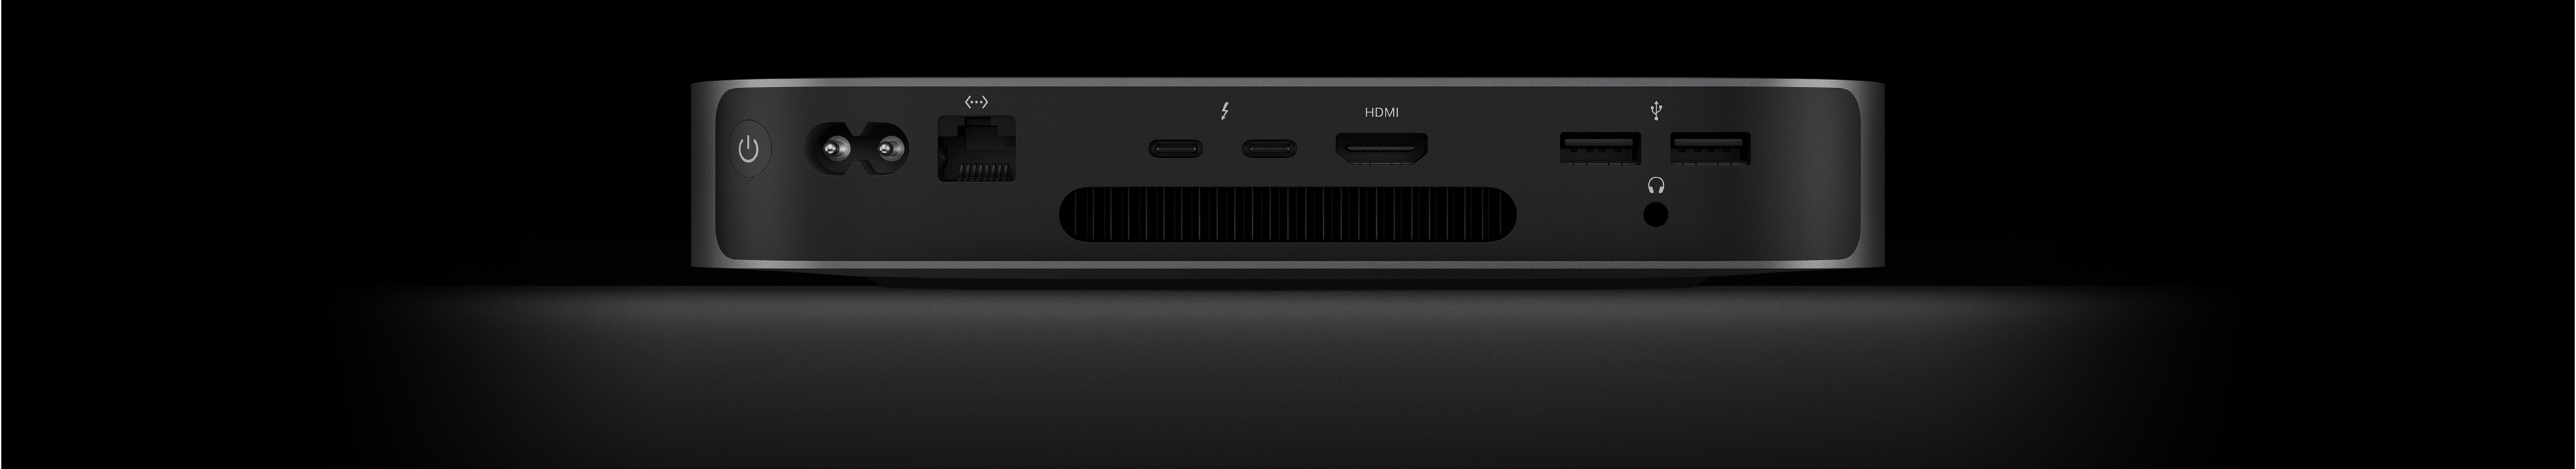 Back view of Mac mini showing the two Thunderbolt 4 ports, HDMI port, two USB-A ports, headphone jack, Gigabit Ethernet port, power port, and power button_river.